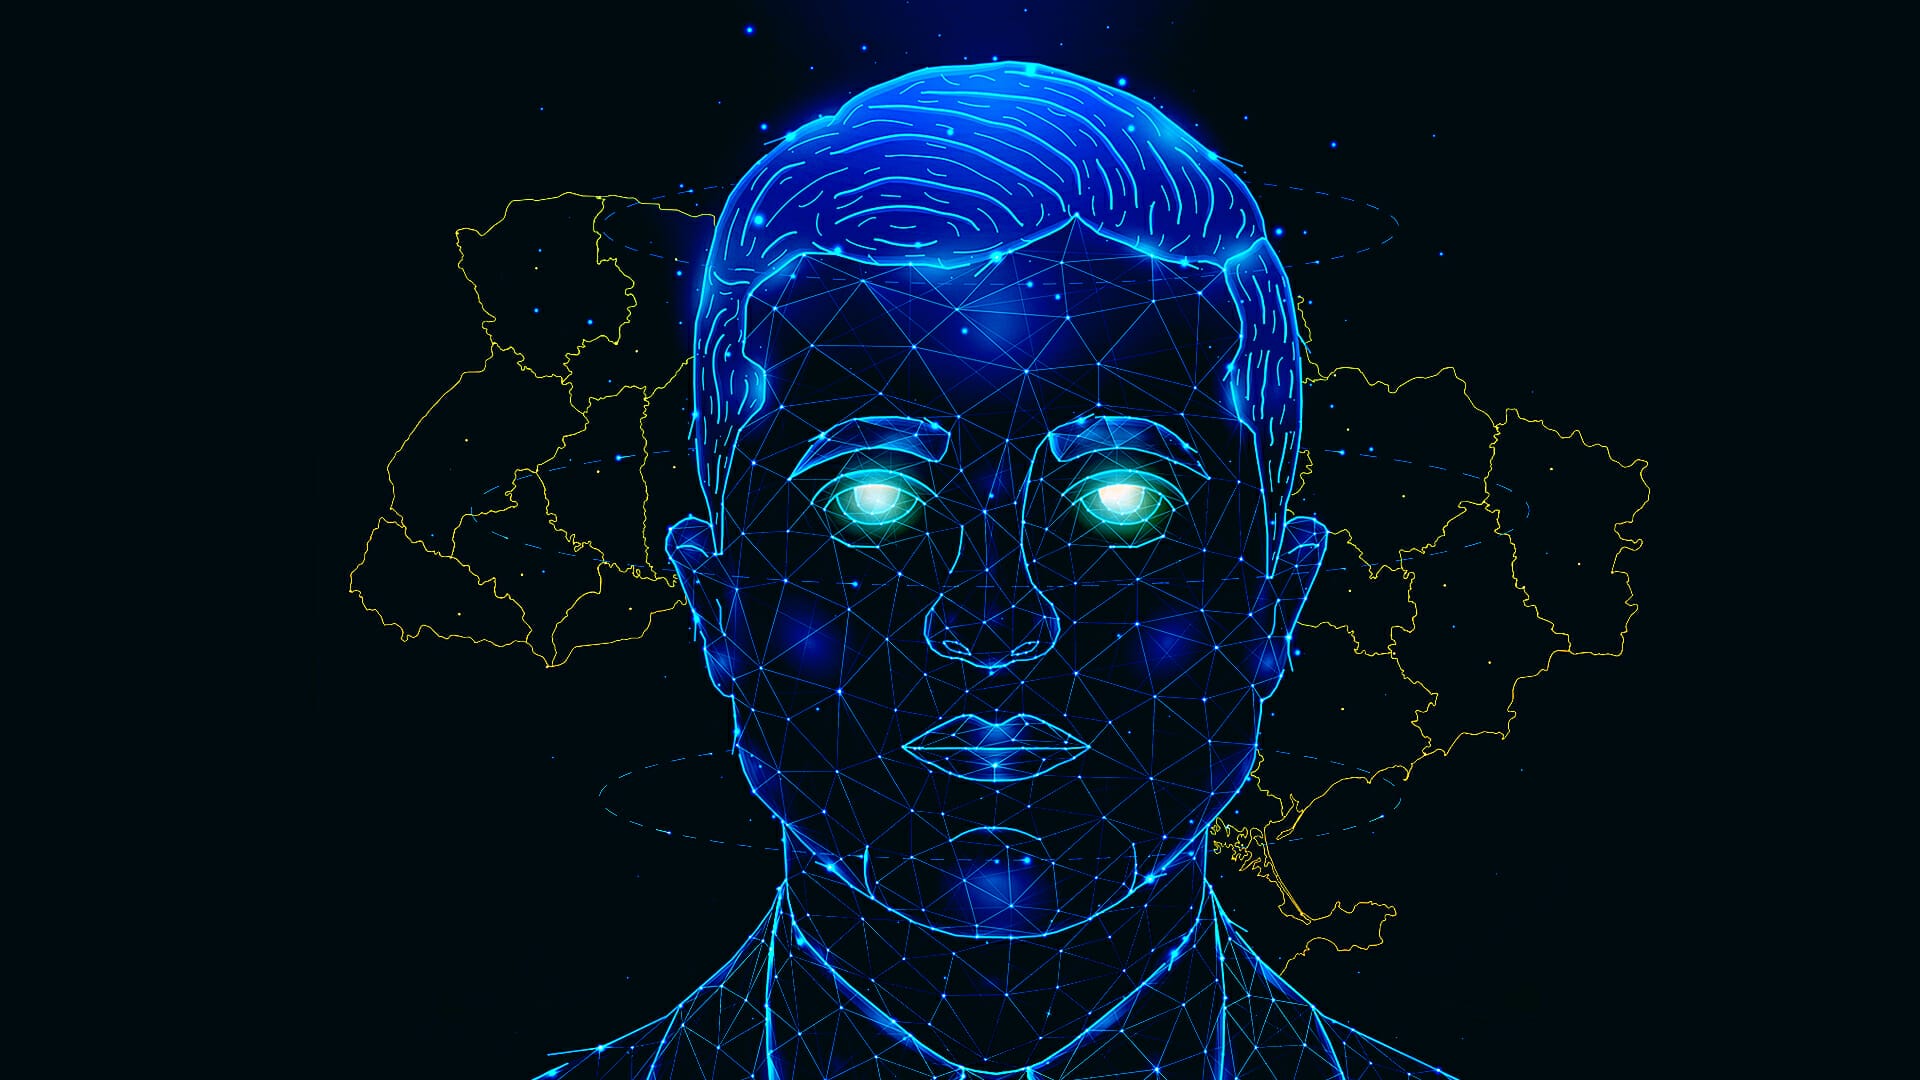 Zelensky And Ukraine Showcase New Hologram Technology. Promotes The Digitalization Of Everything Including Vaccine Passports And Metaverse